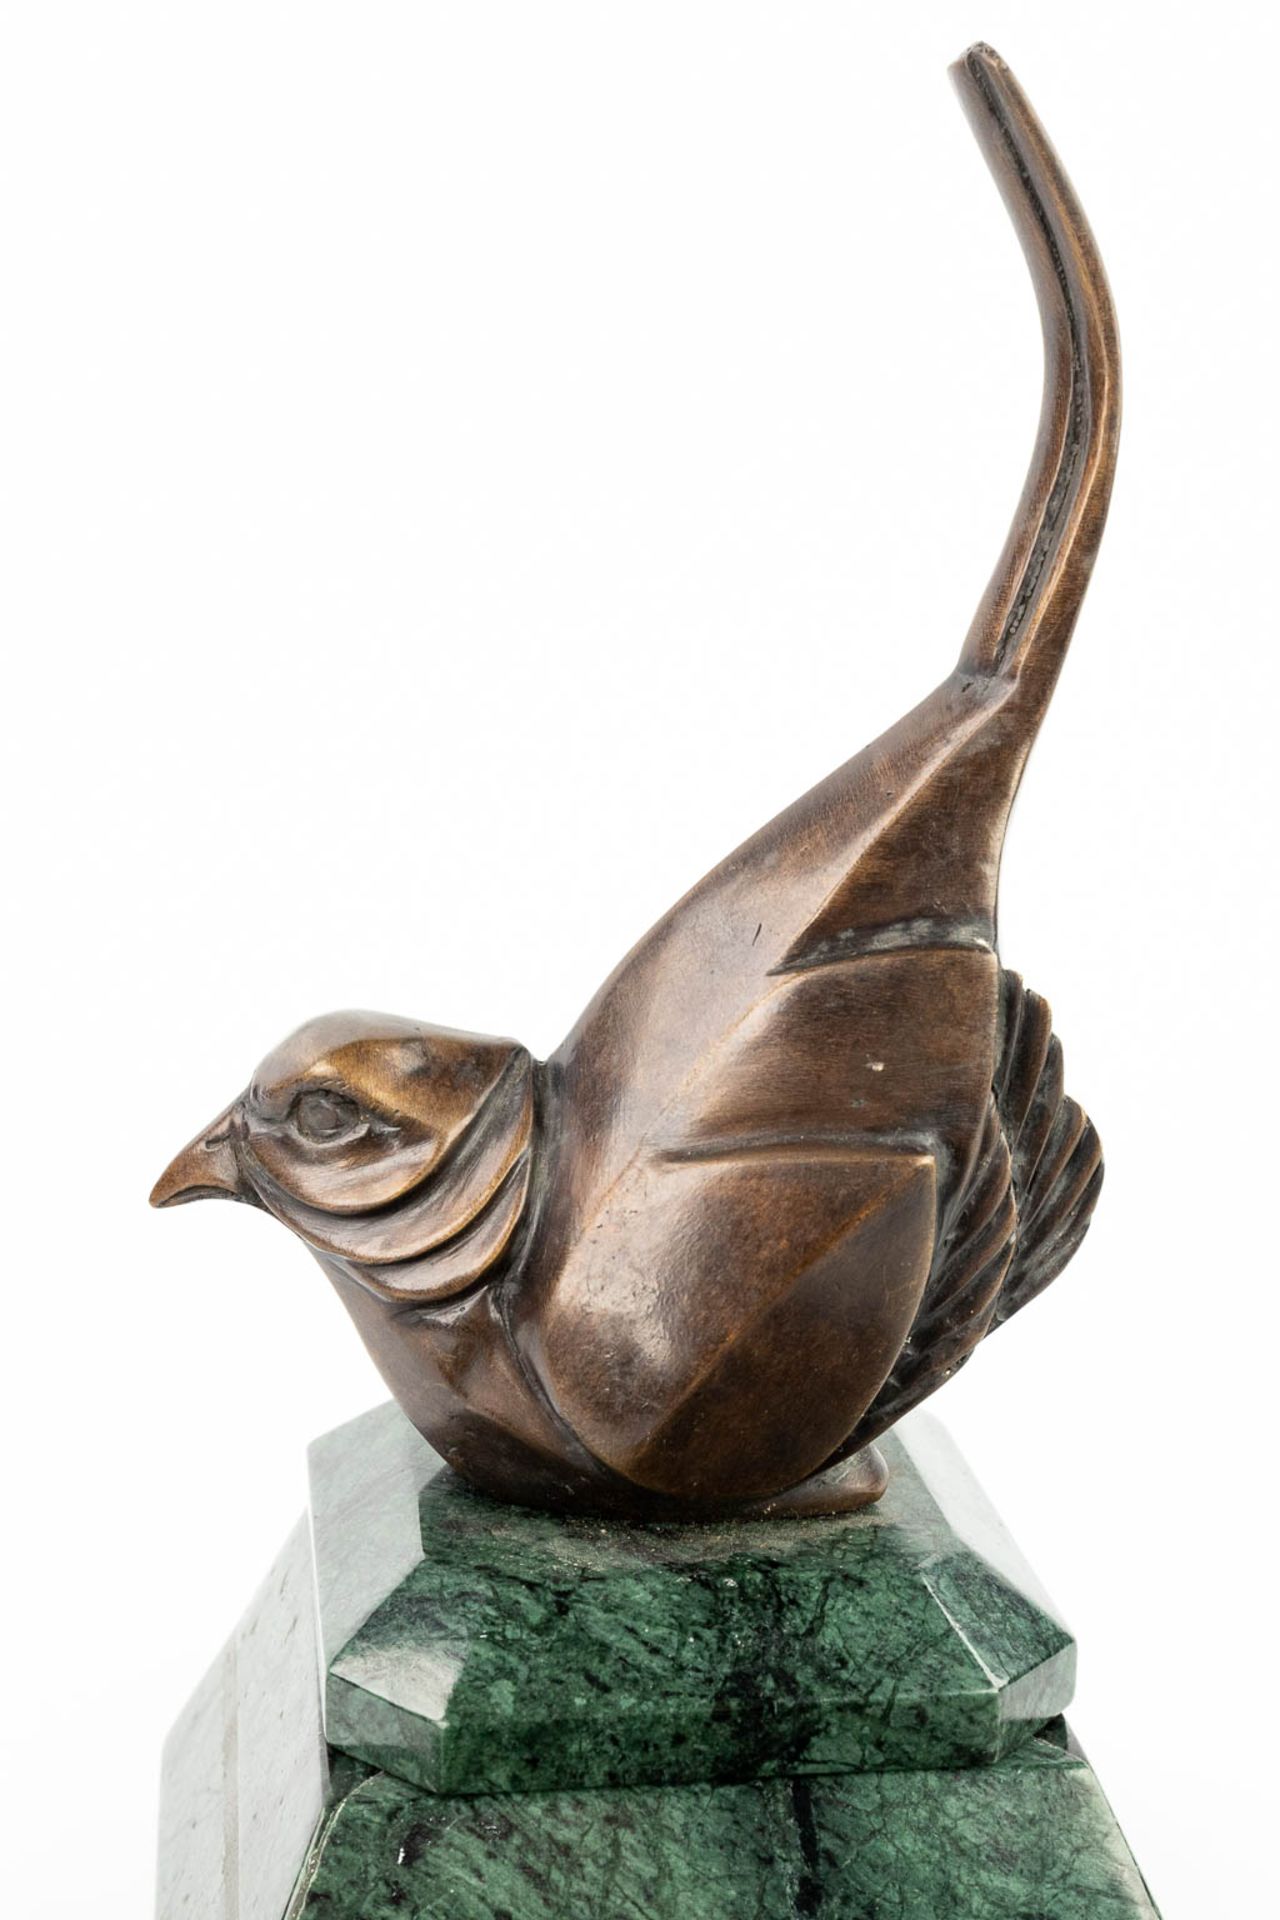 A 'Vide Poche' made of marble with a bird made of bronze in art deco style. - Image 10 of 10